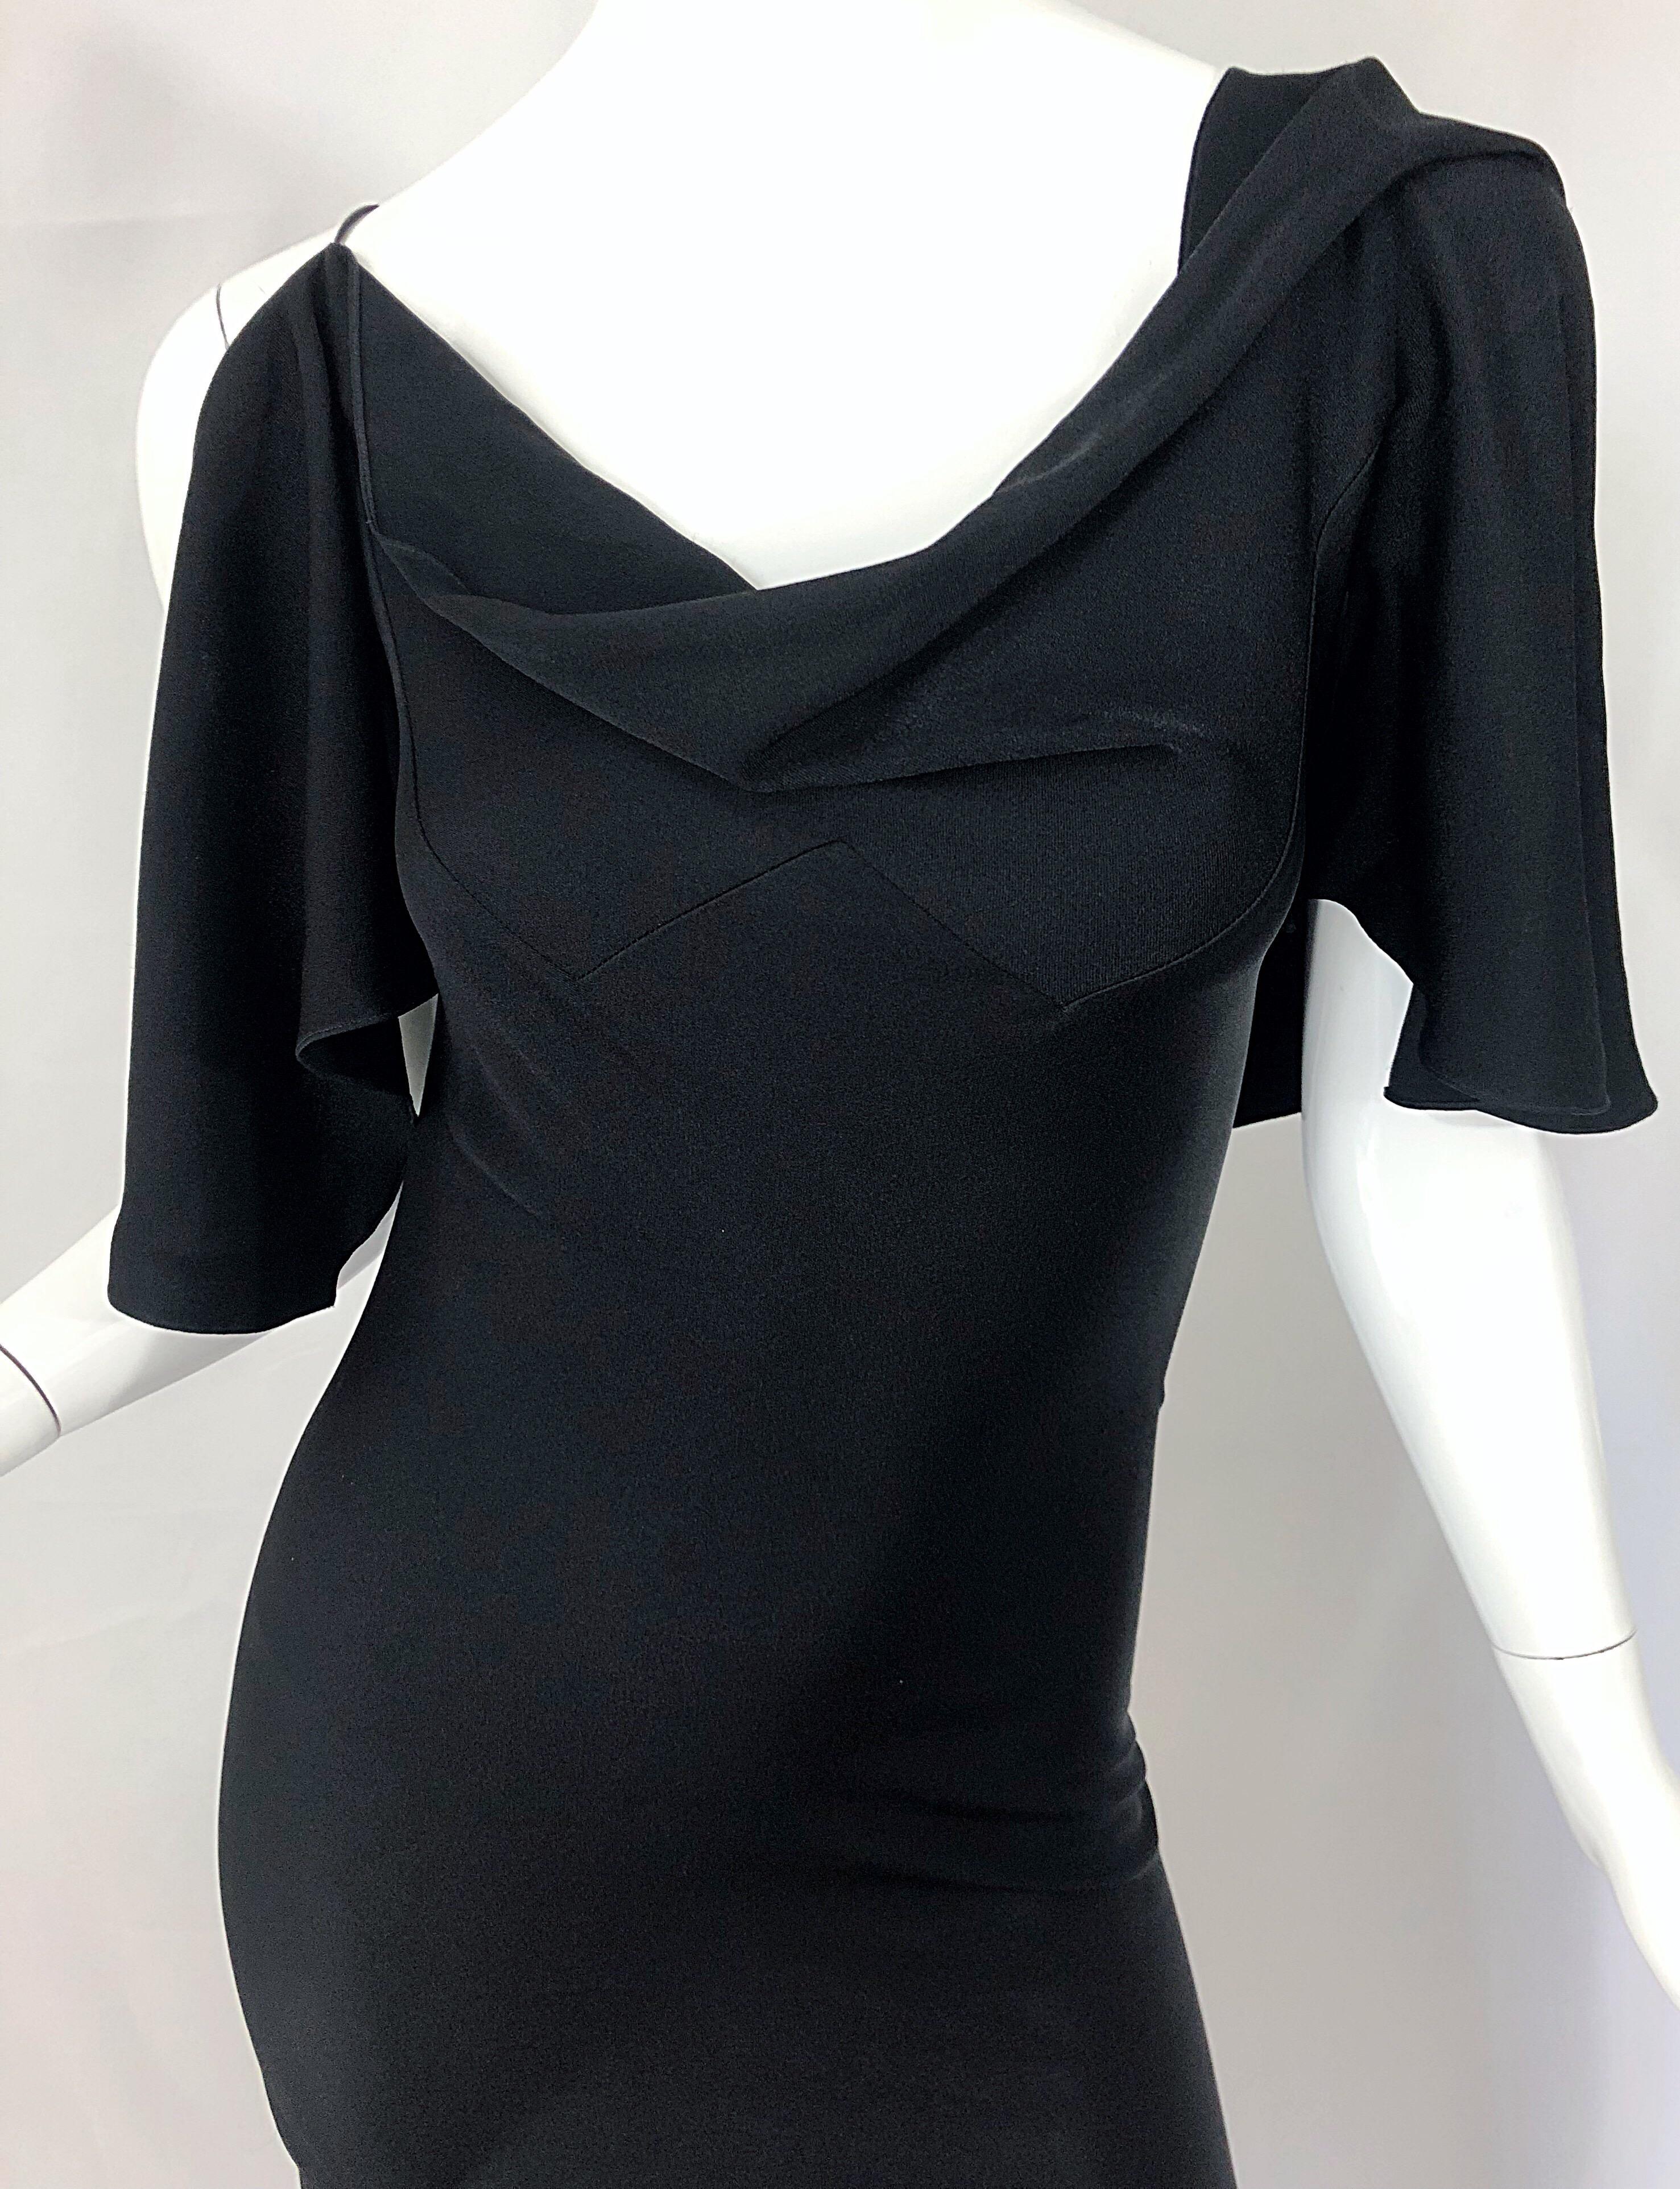 Exquisite early 2000s does 30s JOHN GALLIANO black one cold shoulder full length bias cut evening dress ! Features immaculate draping and gathers one would expect from this legendary designer. Soft Rayon and Acetate blend fabric offers just the